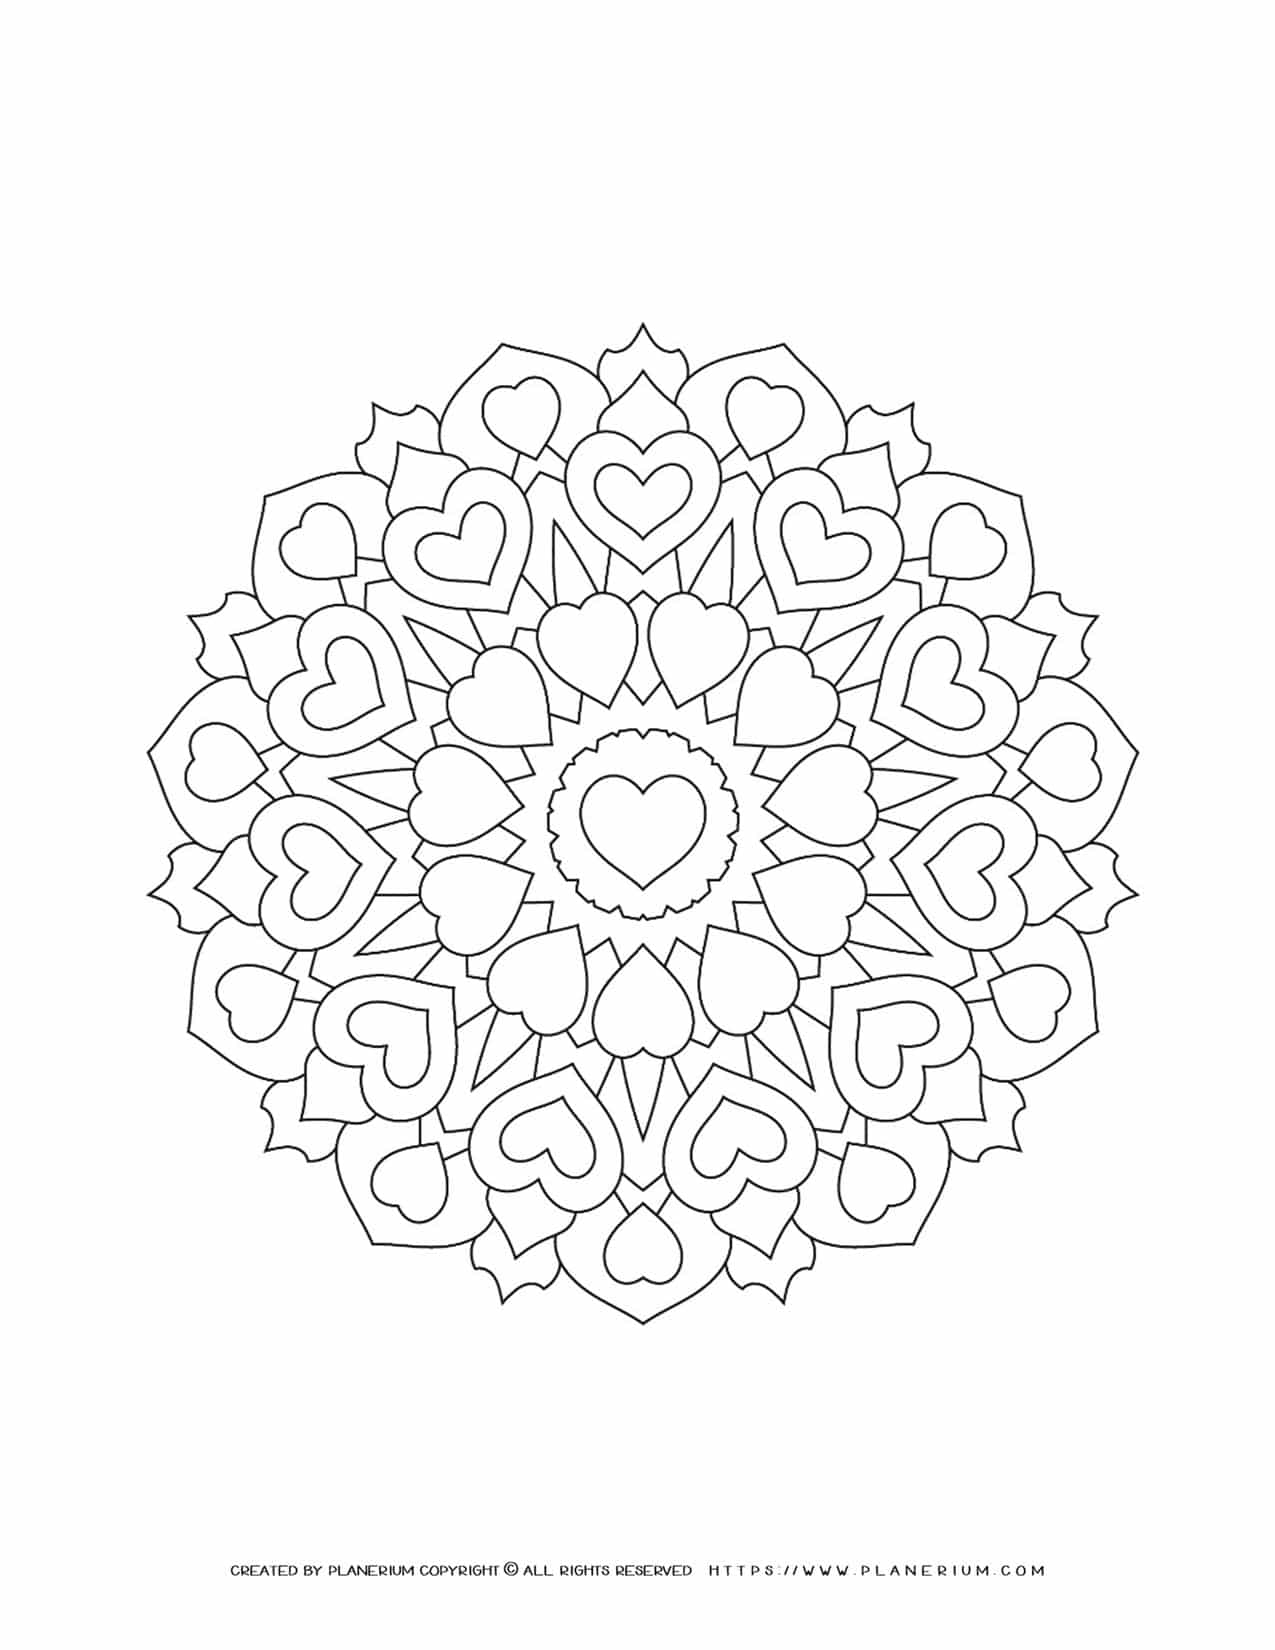 Valentines Day - Coloring Page - Hearts Mandala | Planerium